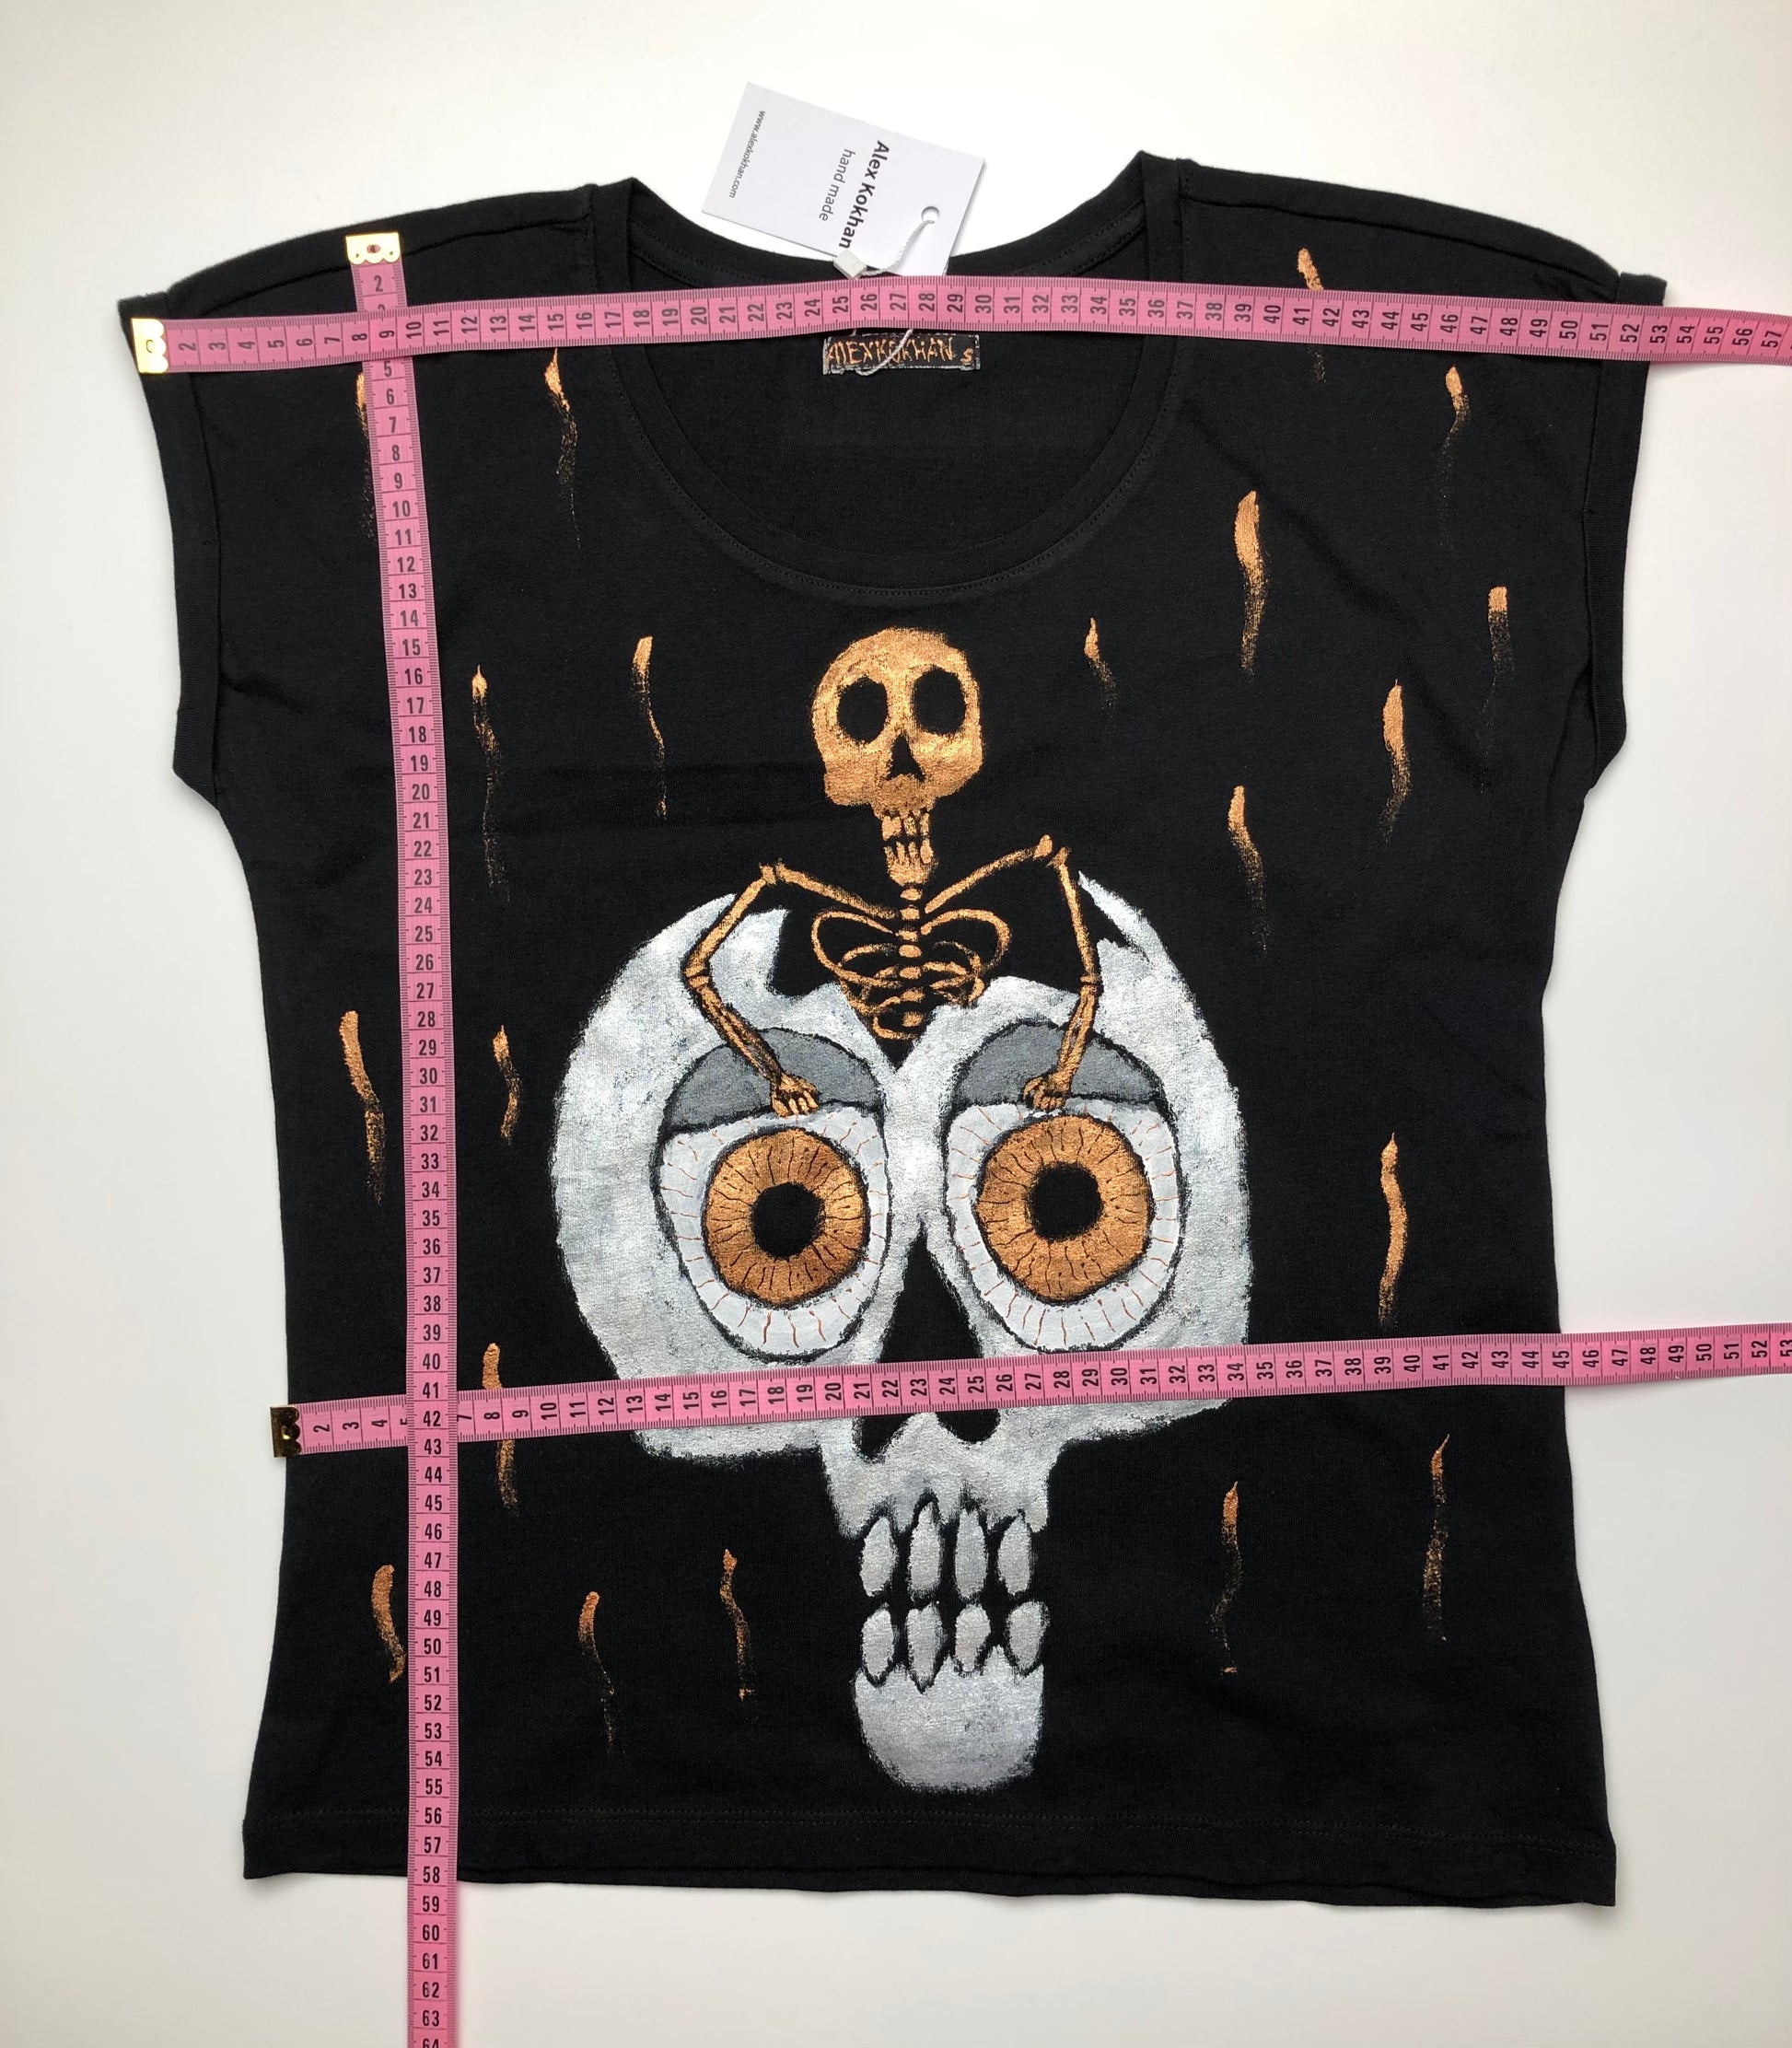 T-shirt in the only size S. Length 59 cm, waist width 44 cm. Skull and skeleton with bones.